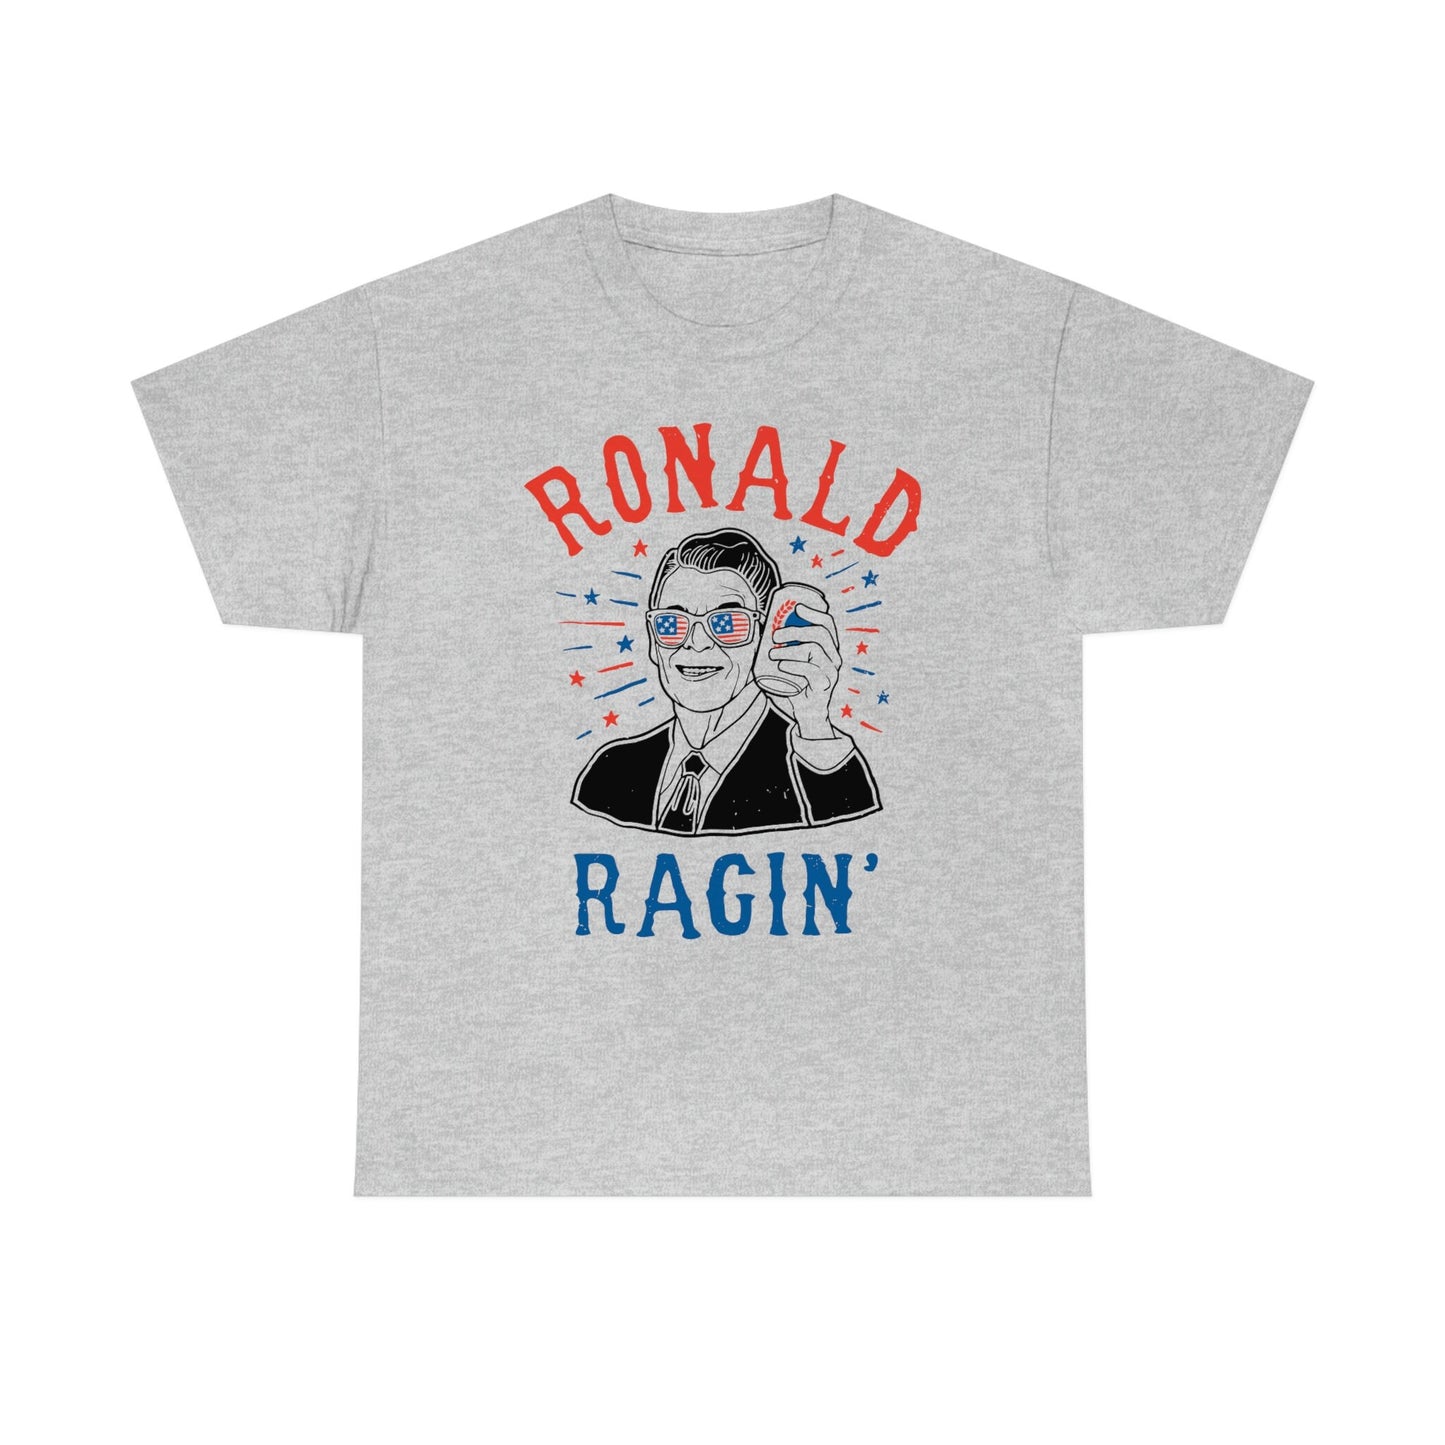 Ronald Ragin' Independence Day Drinking Tee, Independence Day Graphic Tee, Fourth of July Tee, Plus Size Tee, 4th Of July Party, Summer Tee